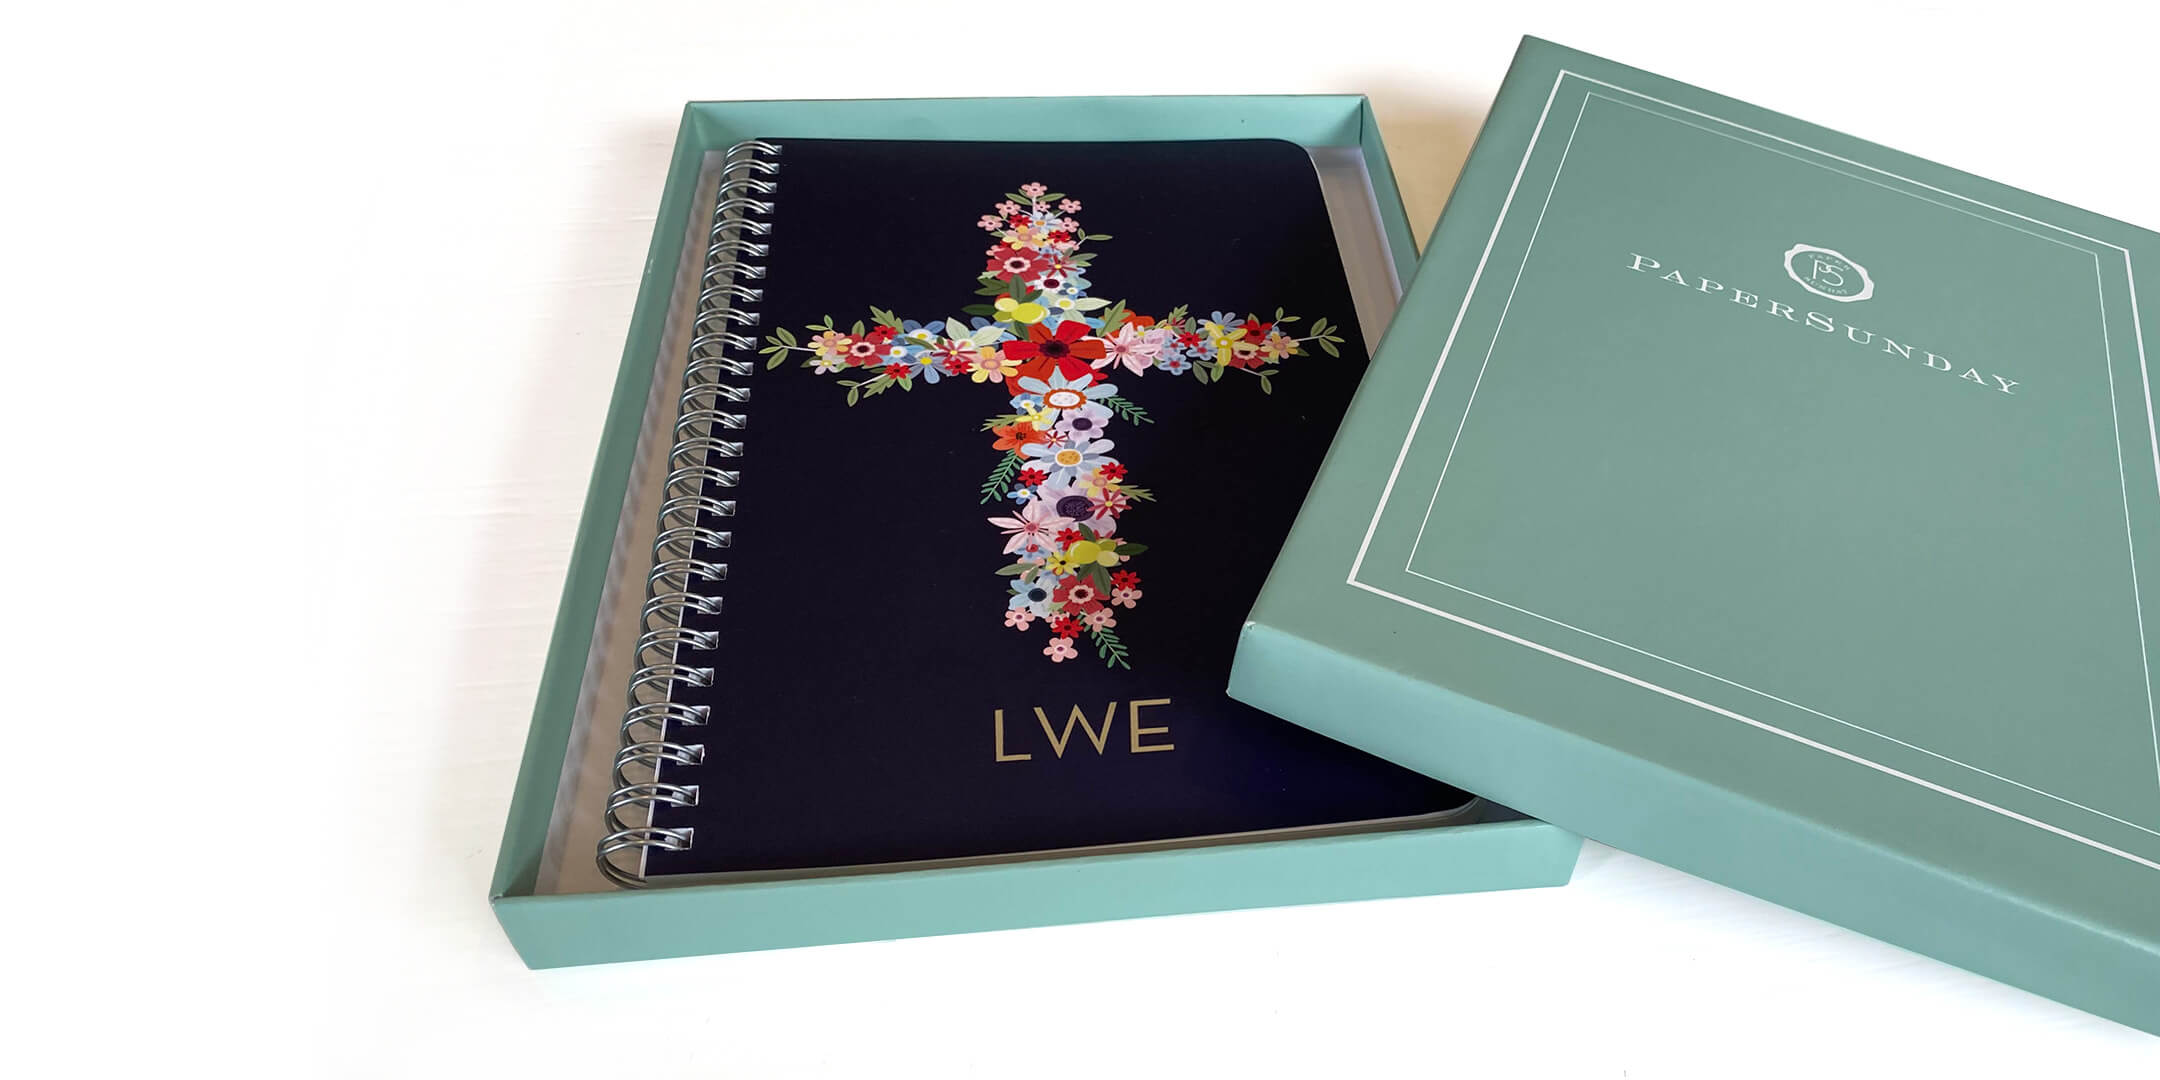 Each journal is thoughtfully designed and made with the highest quality materials. With your name inserted into scriptures on every page.